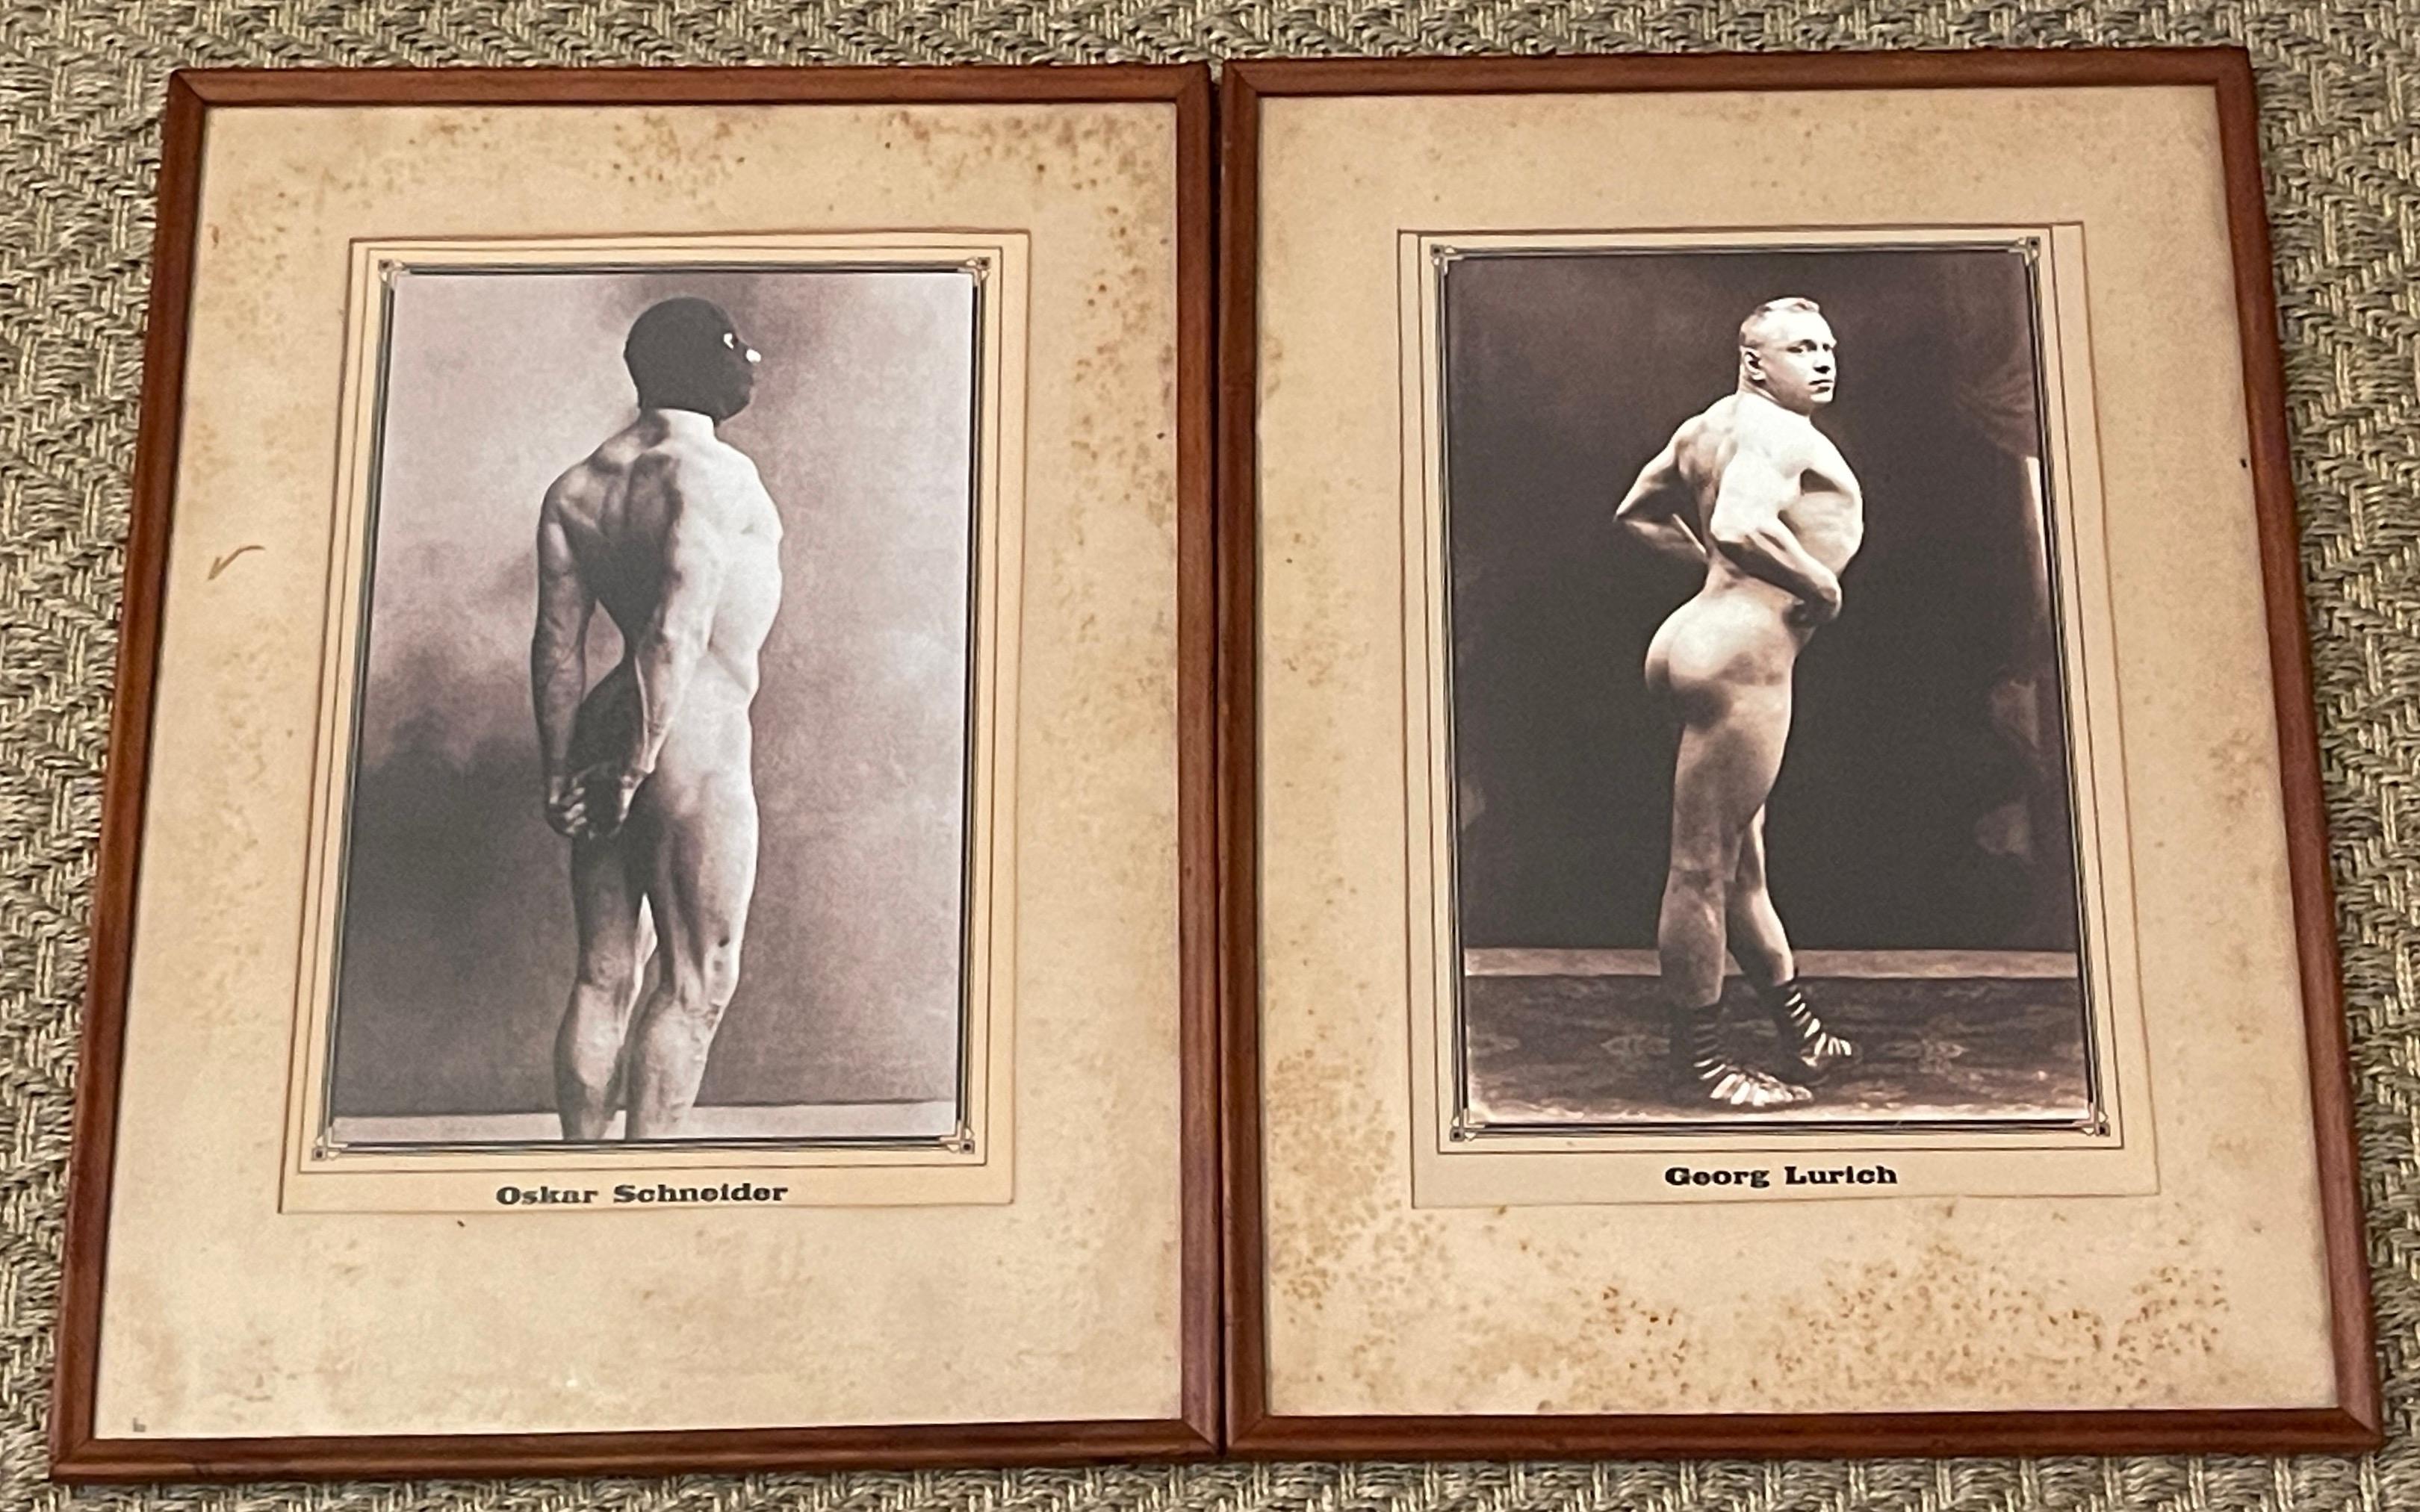 Pair of Greco Roman Tournament Posters of Oskar Schneider & Georg Lurich , Nude
Russia, Pre 1915

The pair of Tsarist Russian Tournament Posters depicting Oskar Schneider and Georg Lurich is an extraordinary find that offers a glimpse into the world